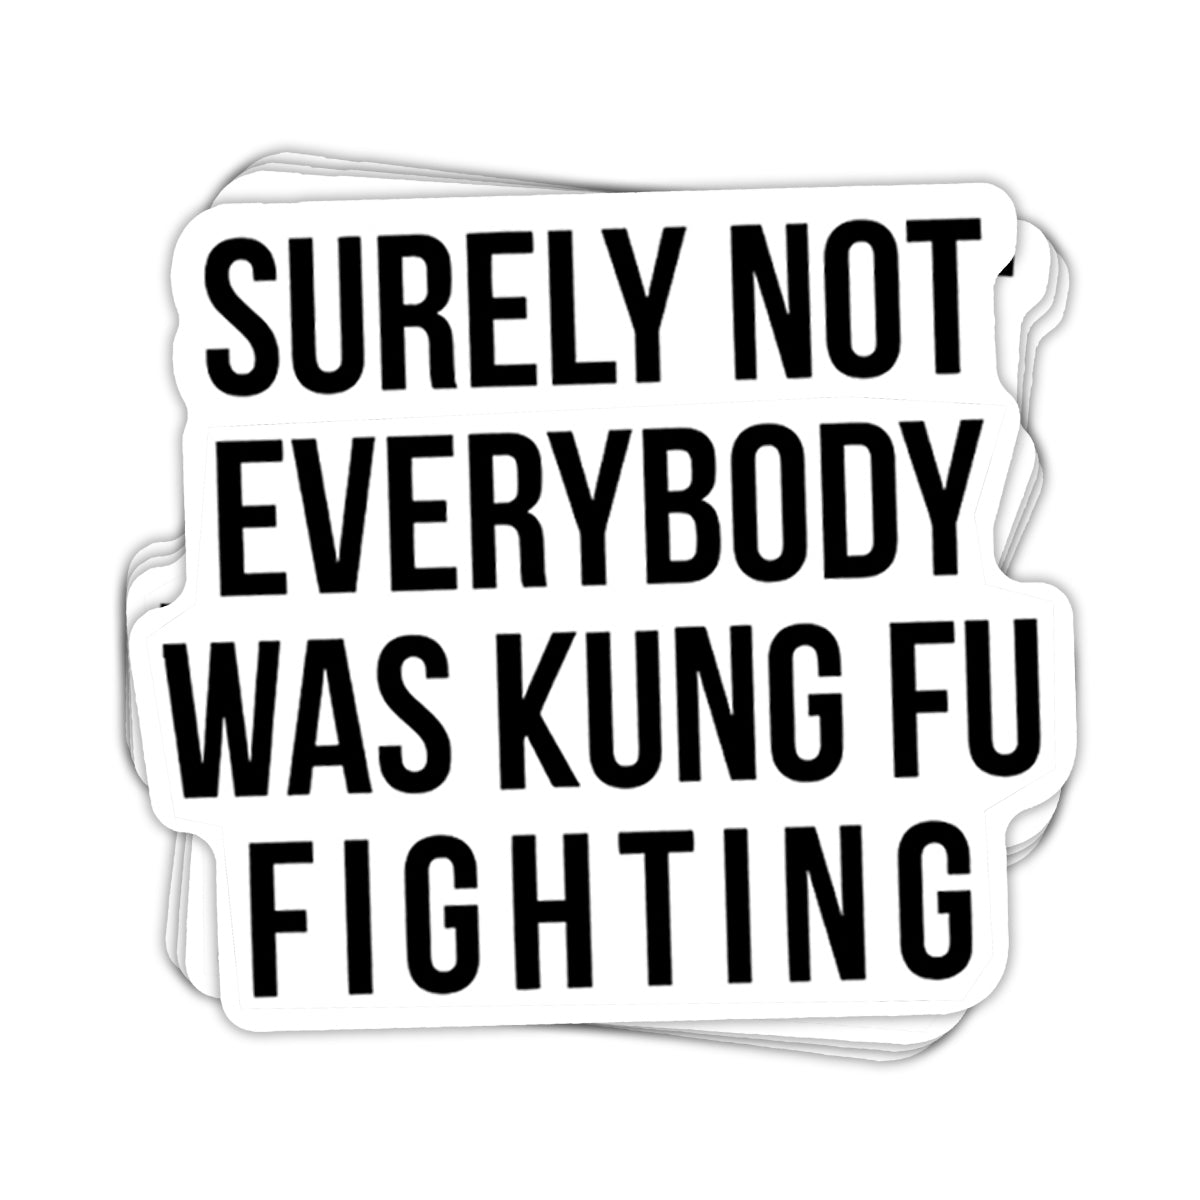 Surely Not Everybody Was Kung Fu Fighting Vinyl Sticker - BustedTees.com